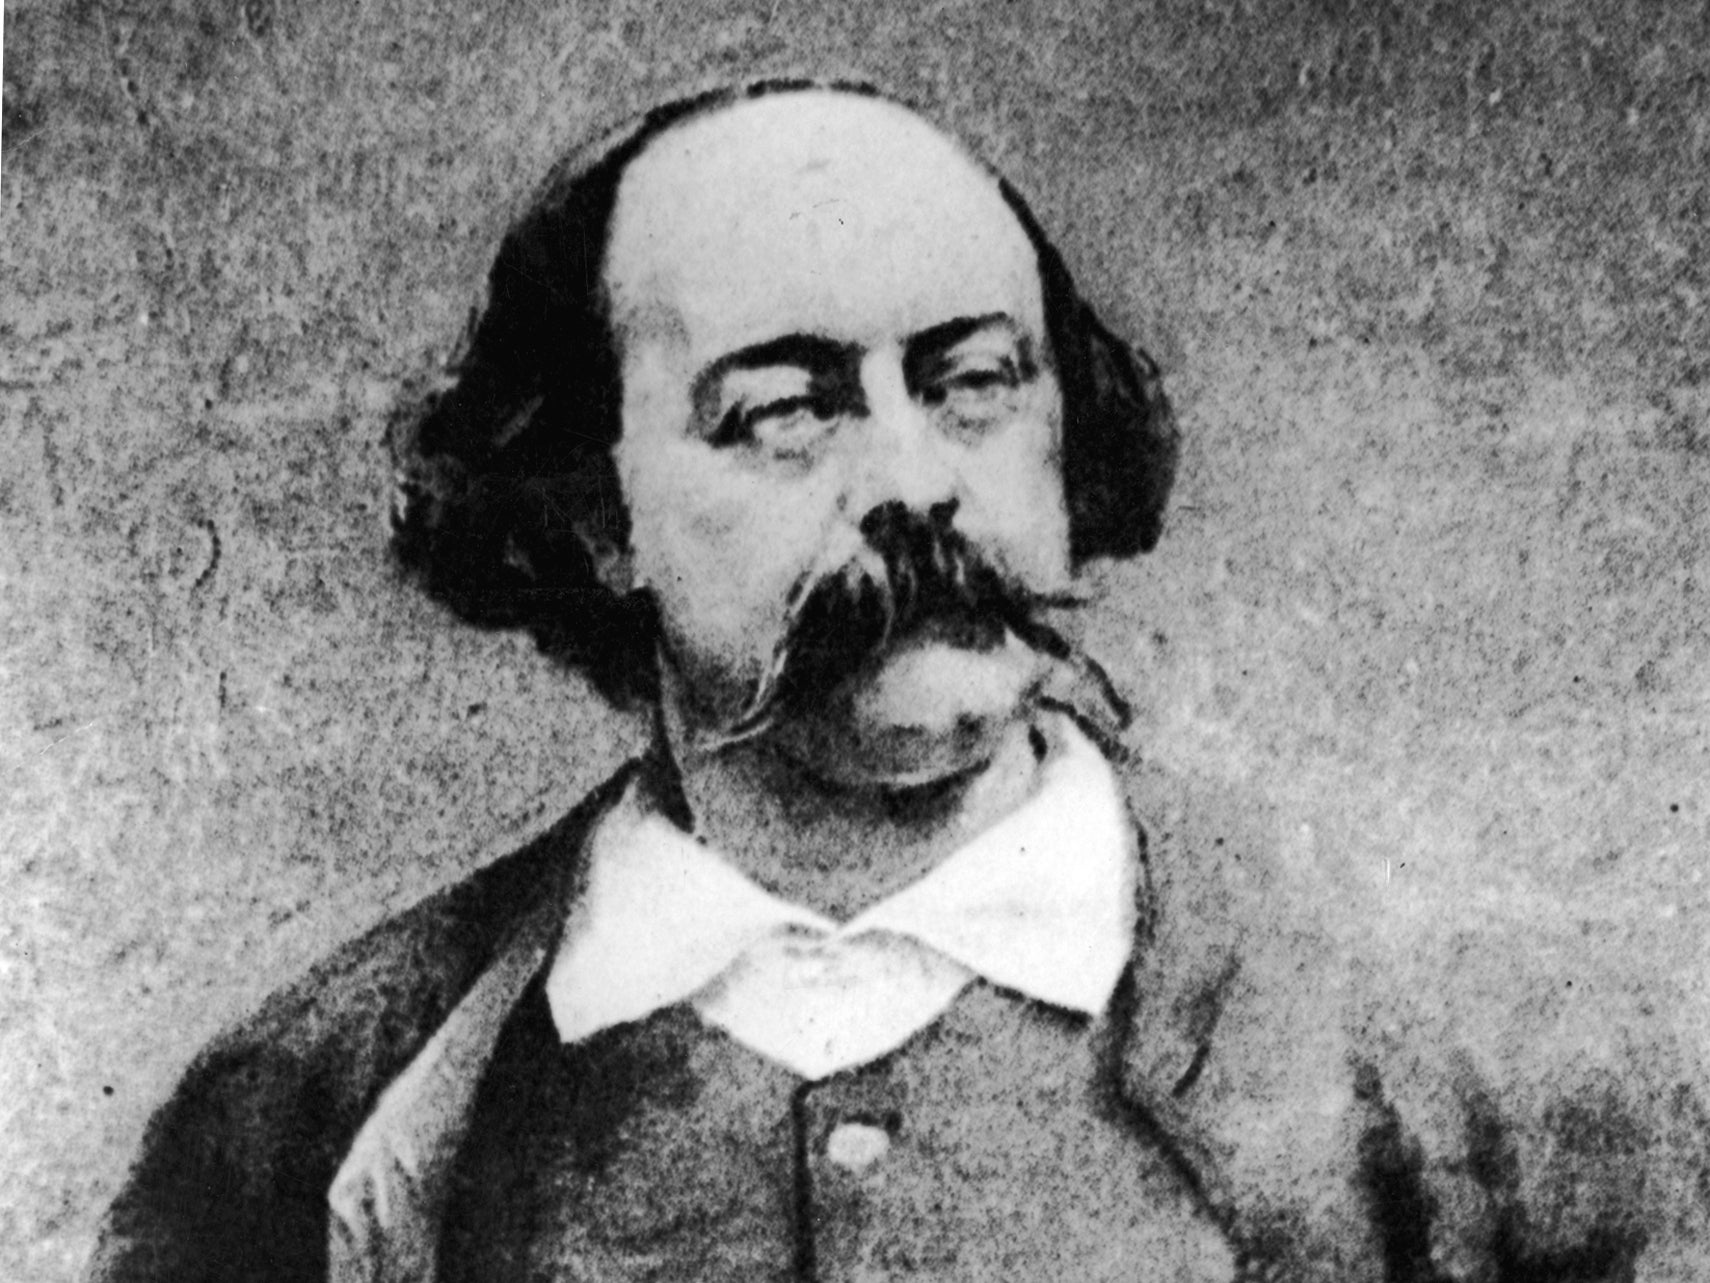 Gustave Flaubert (1821-1880) was tried and acquitted on charges of ‘immorality’ following the publication of ‘Madame Bovary’